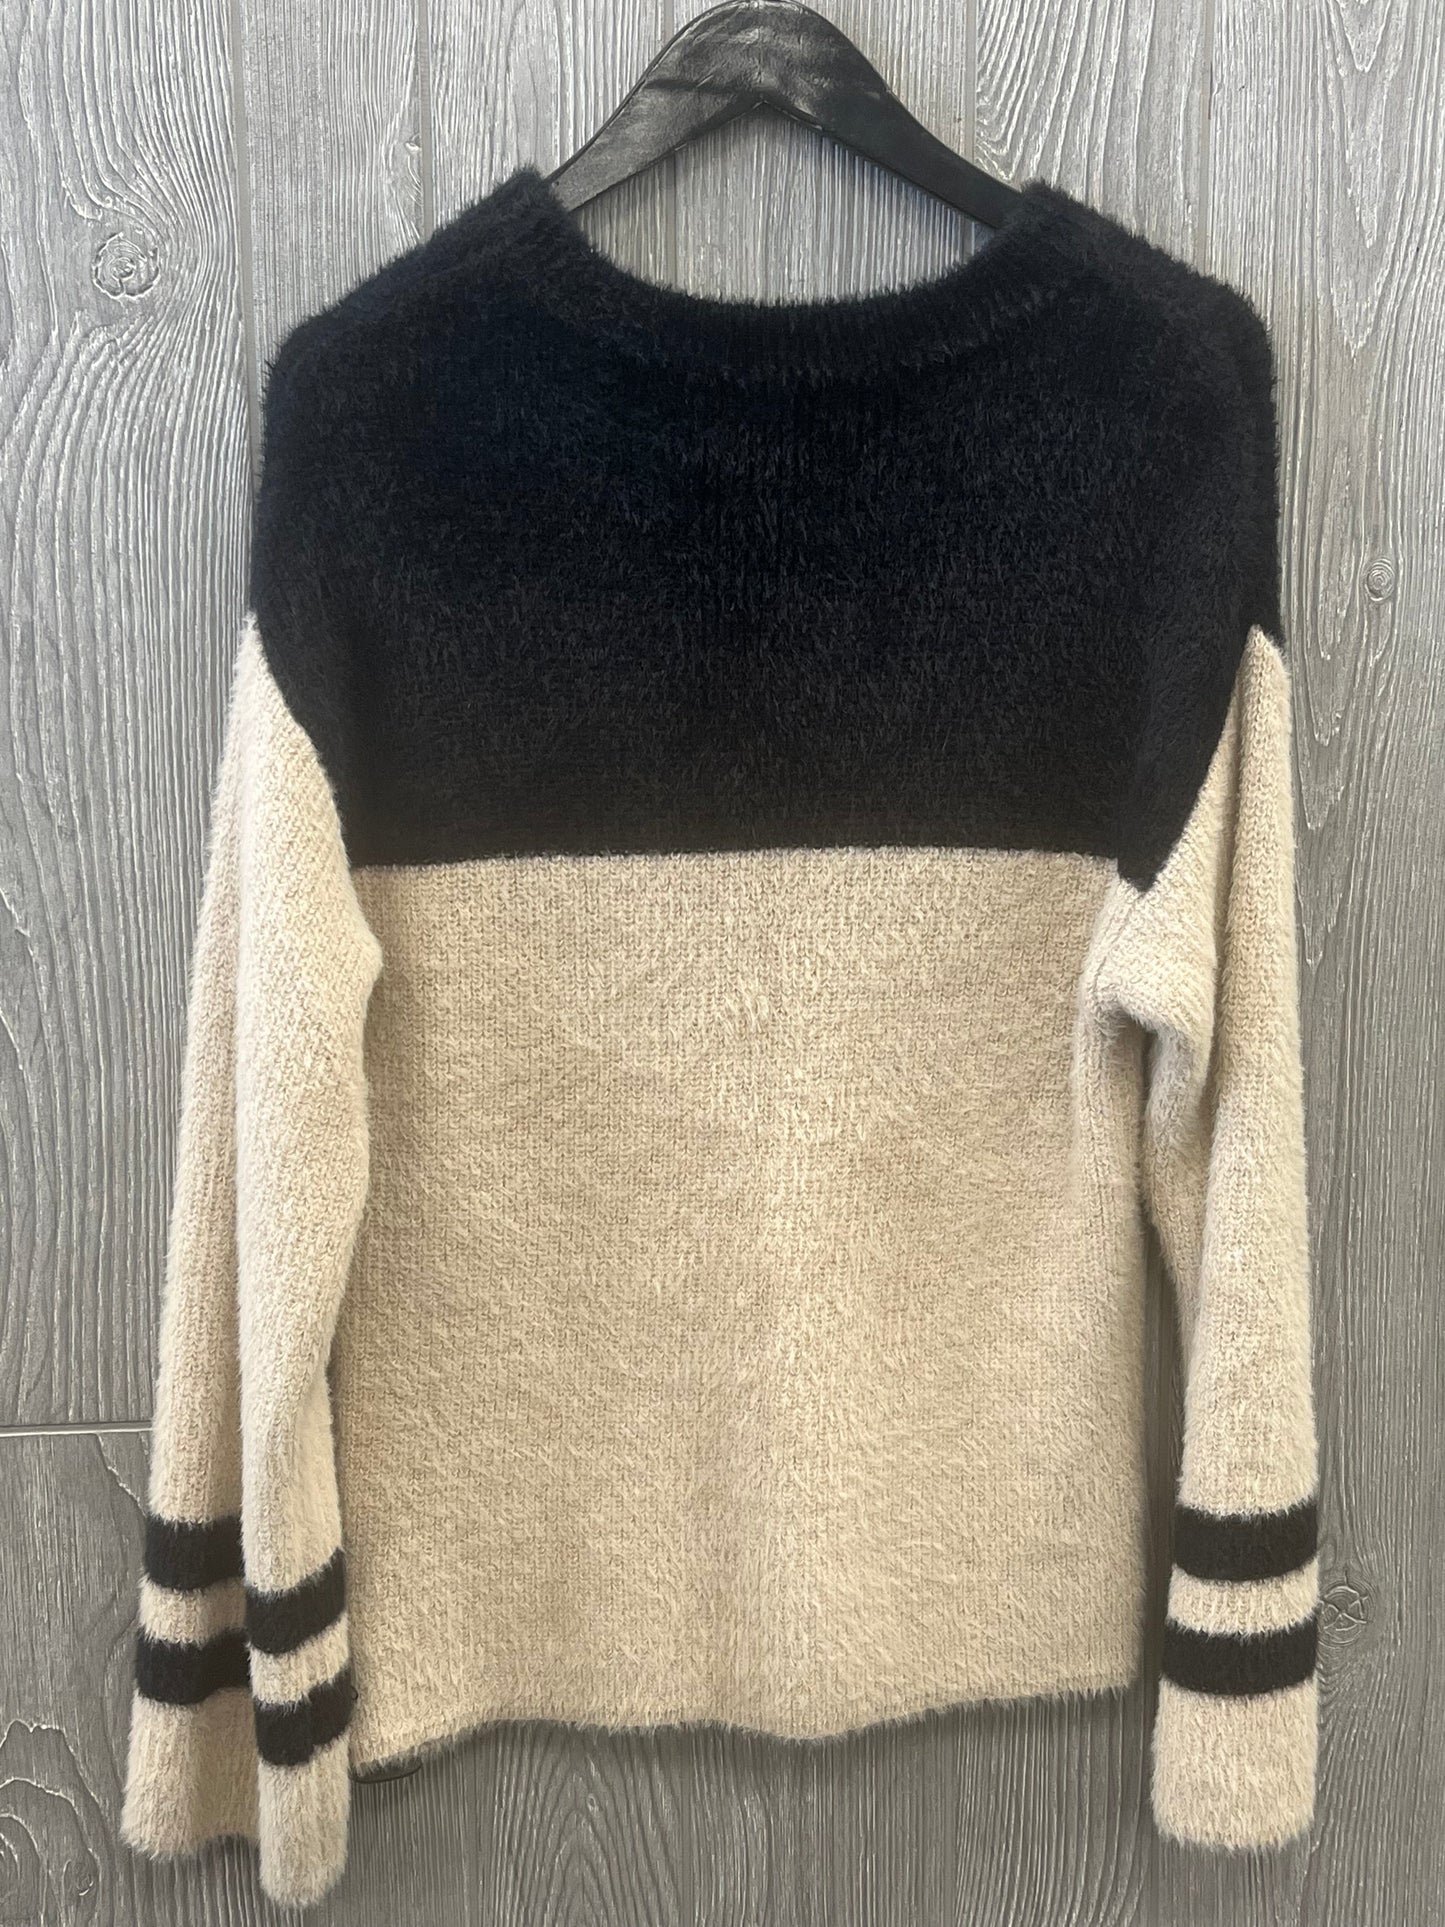 Sweater By Knox Rose  Size: Xs